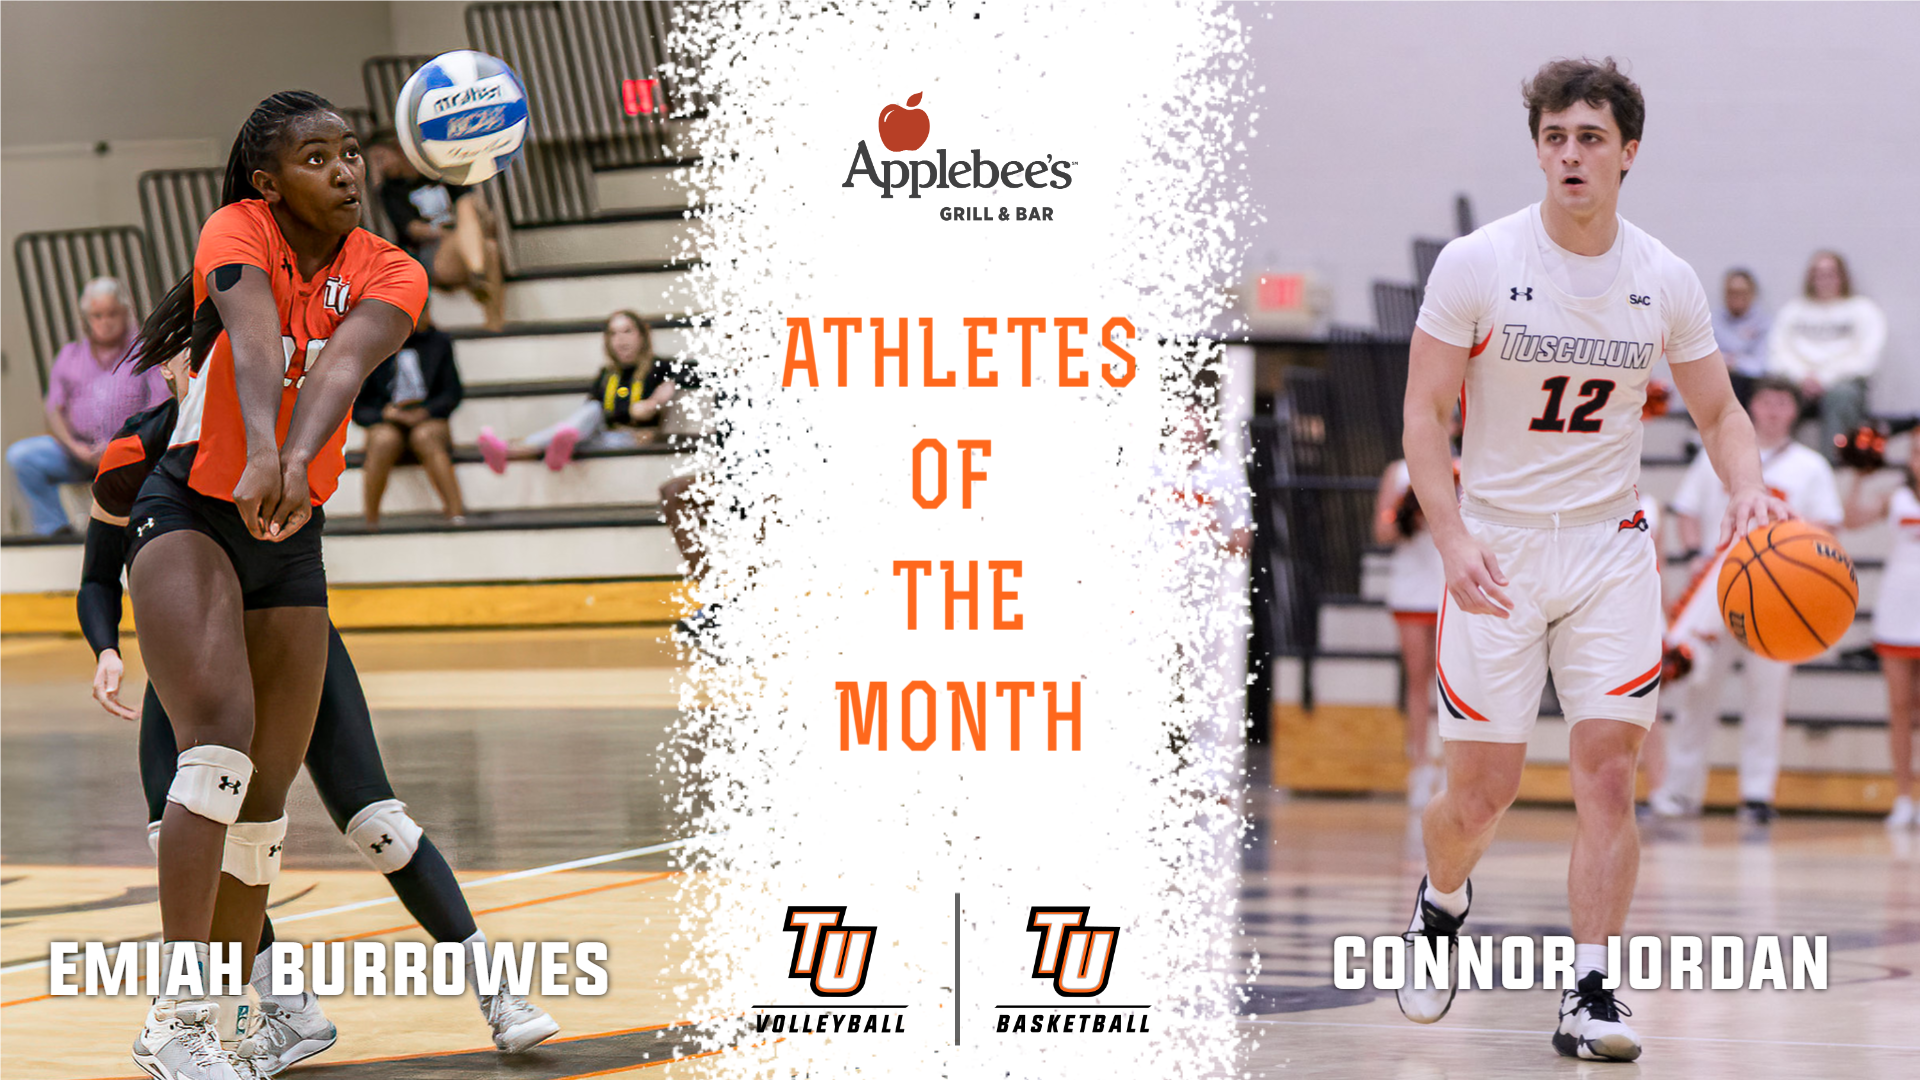 Jordan, Burrowes named Applebee's Student-Athletes of the Month